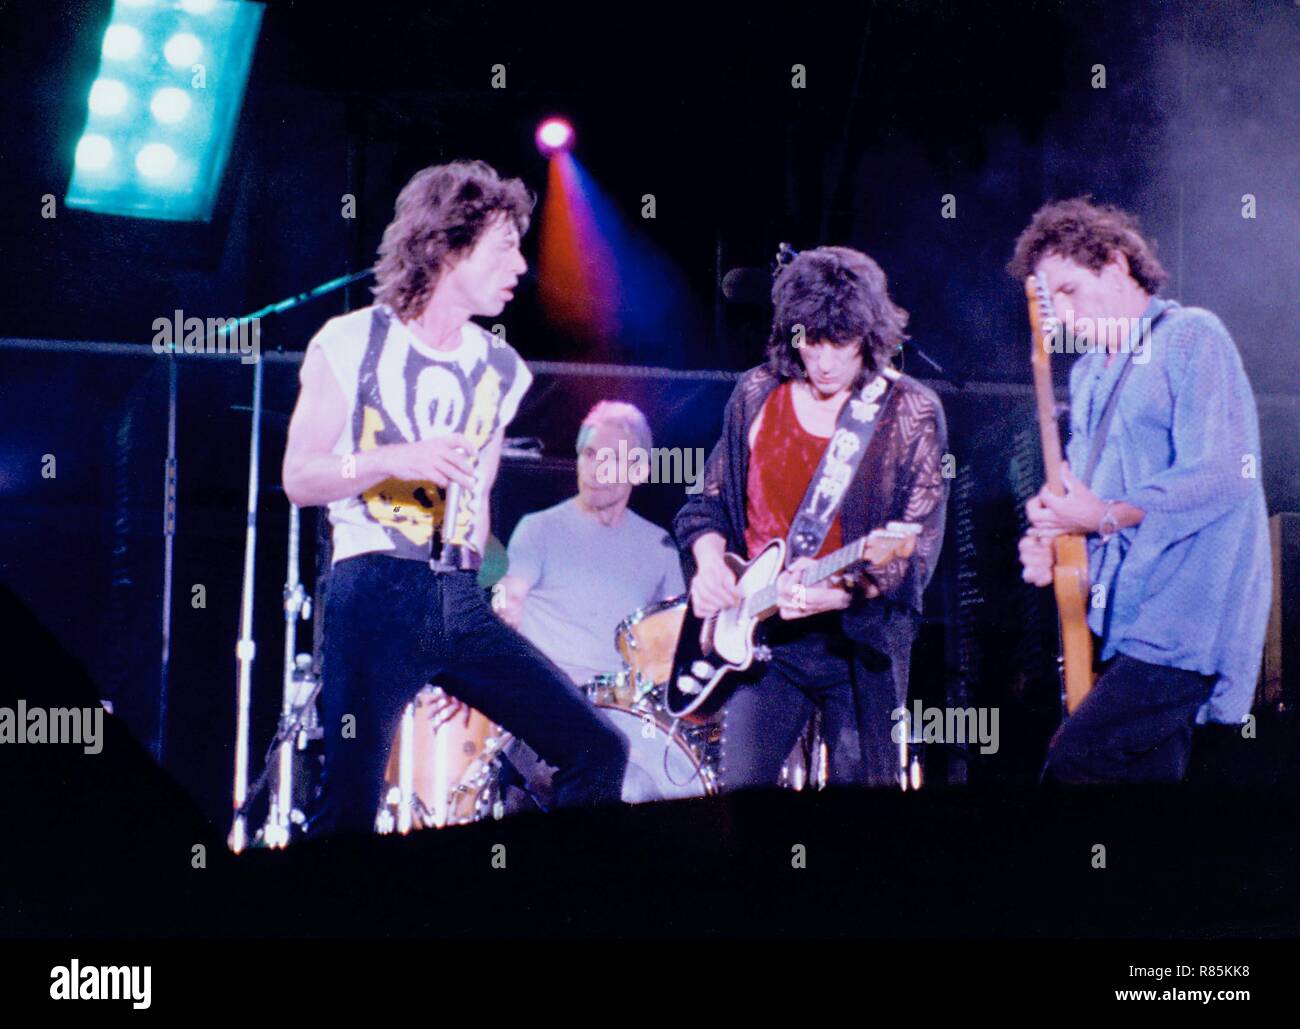 ROLLING STONES IN CONCERT AT GIANTS STADIUM, EAST RUTHERFORD, NJ 08-14-1994 PHOTO BY MICHAEL BRITO MICK JAGGER CHARLIE WATTS RON WOOD KEITH RICHARDS Stock Photo